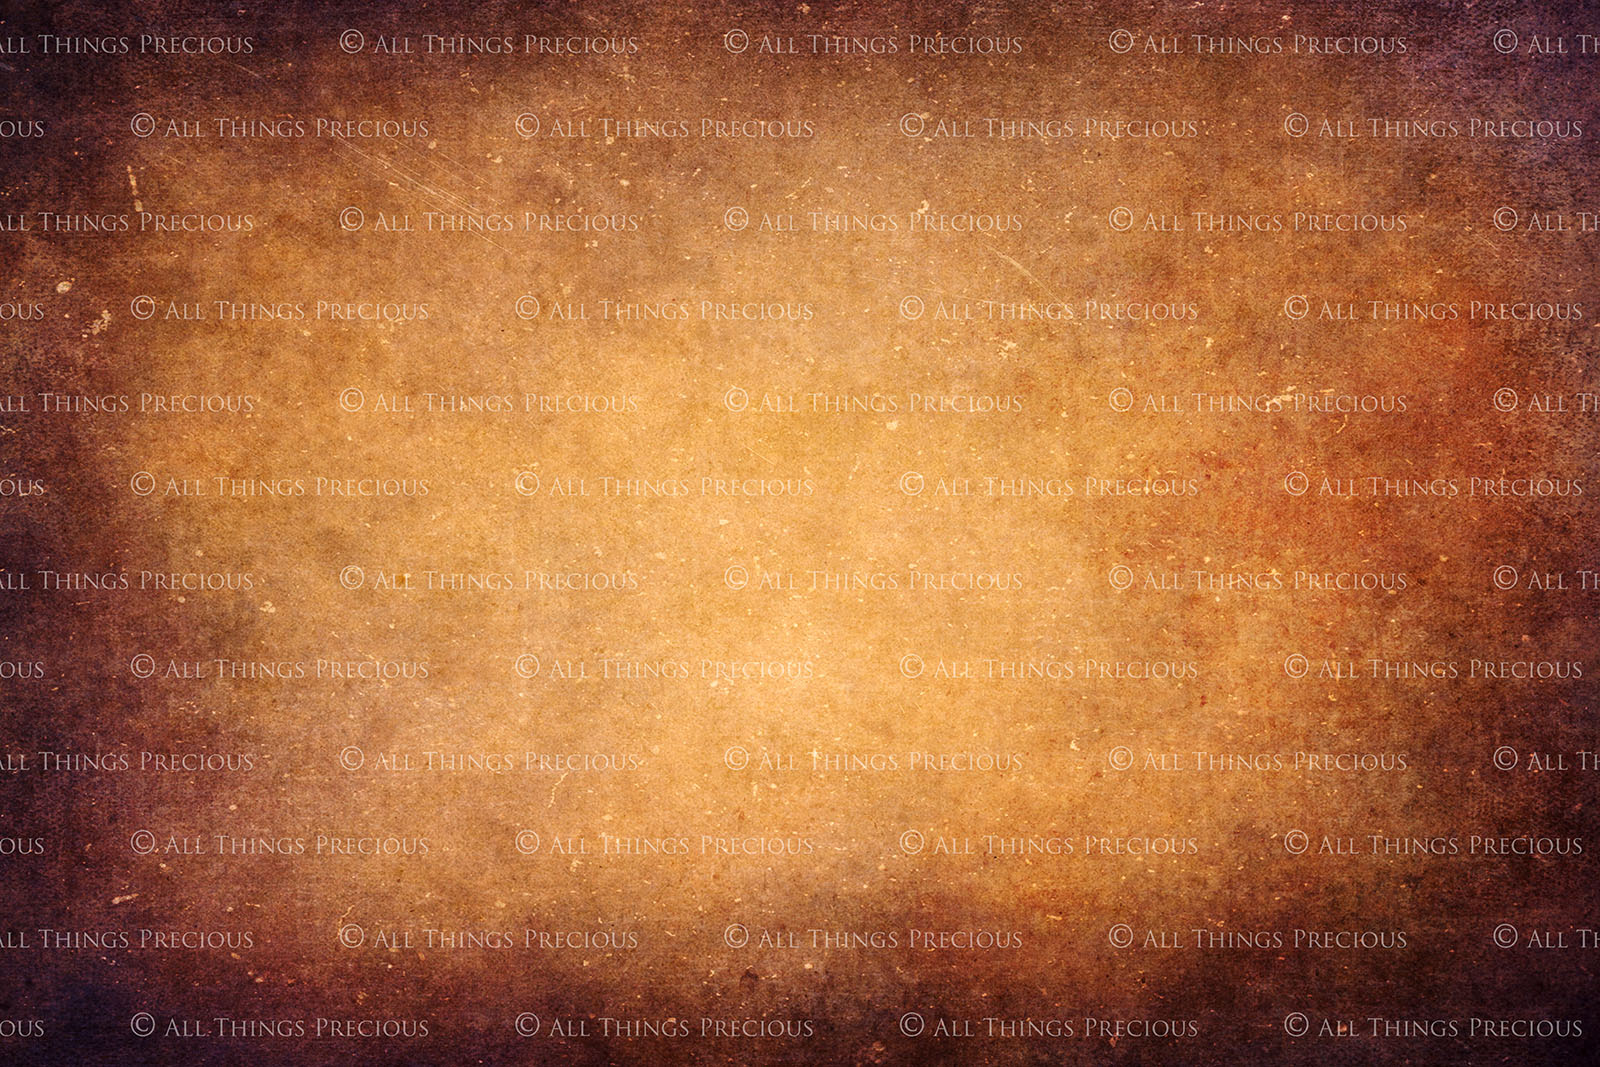 Warm Tinted Textures. Fine art texture for photographers, digital editing. Photo Overlays. Antique, Old World, Grunge, Light, Bundle. Textured printable Canvas, Colour, black and white, Bundle. High resolution, 300dpi Graphic Assets for photography, digital scrapbooking and design. By ATP Textures